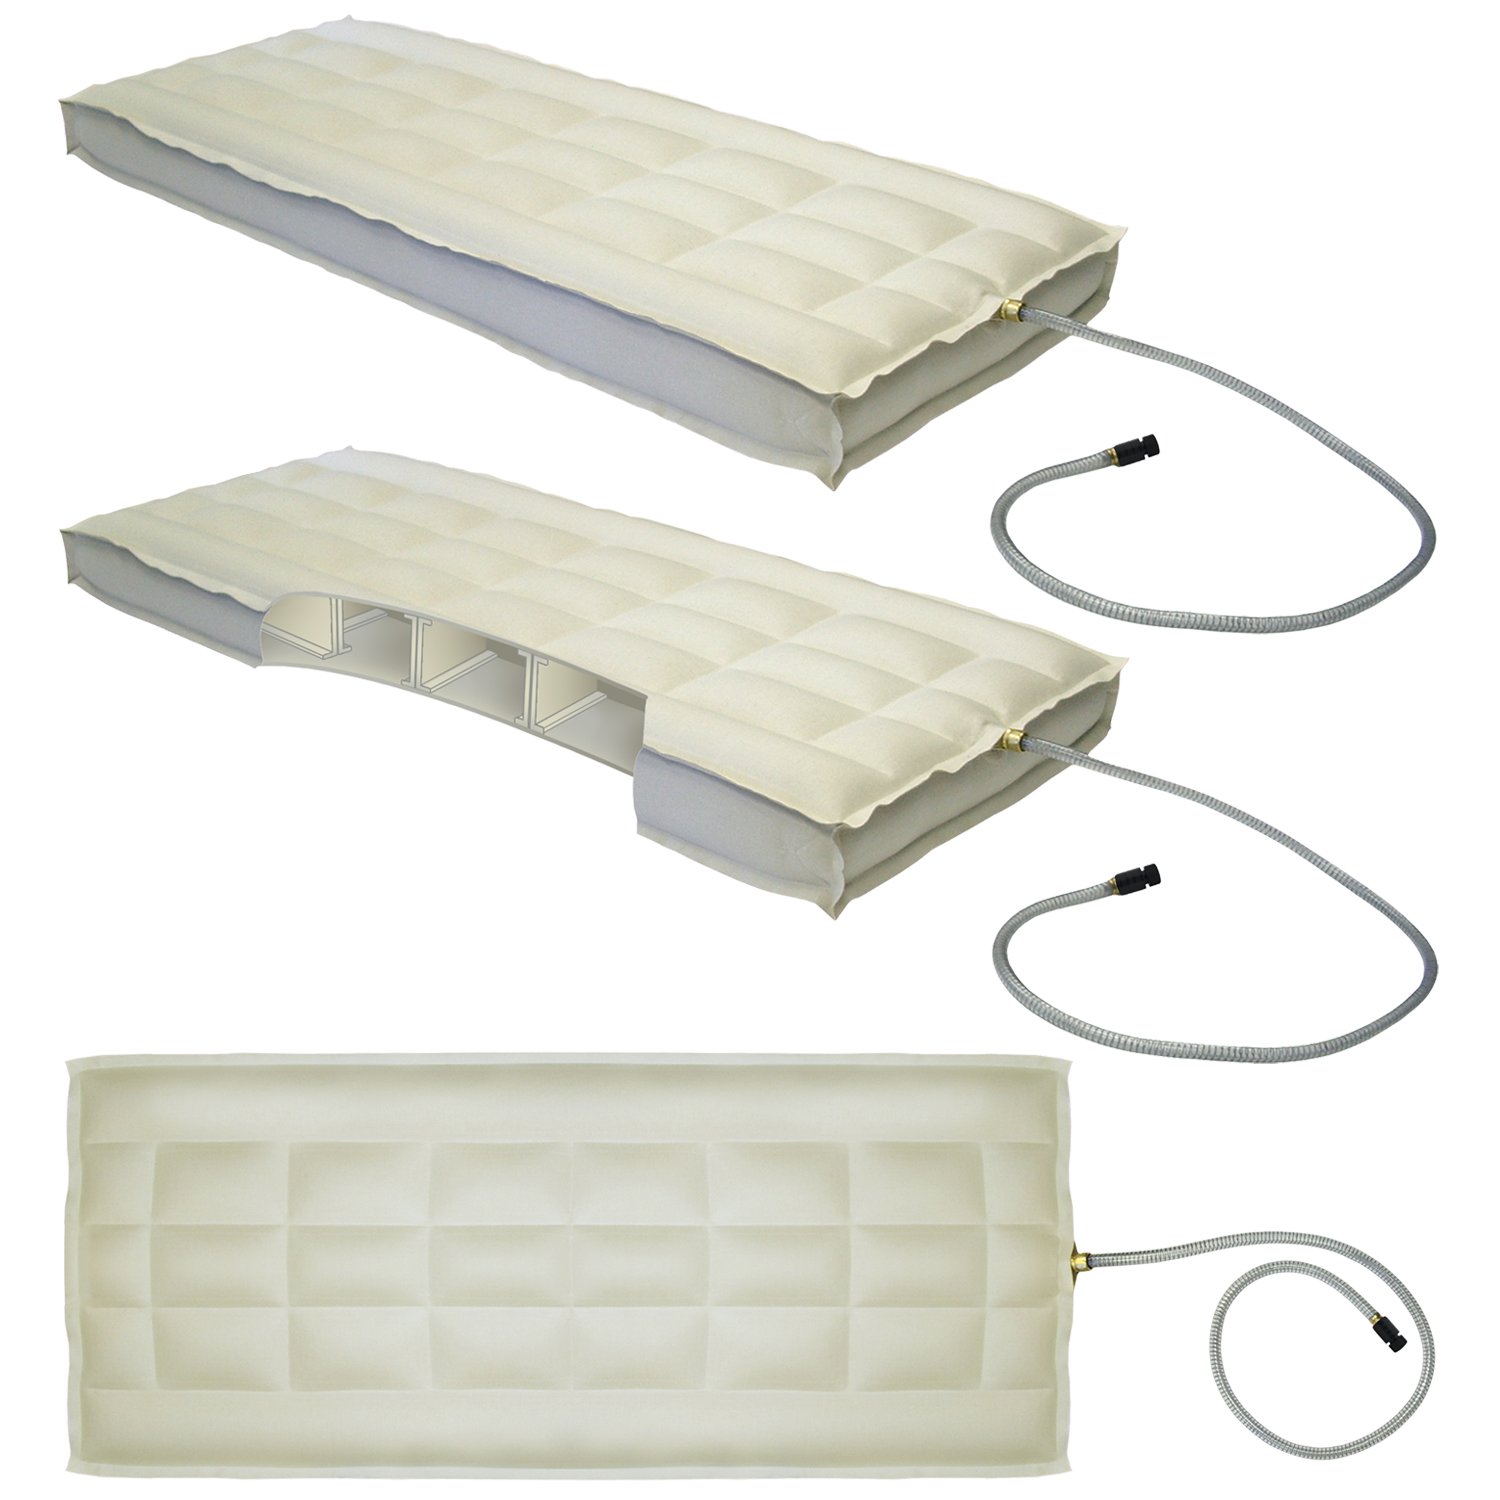 Select Comfort Sleep Number E King Size Air Chamber for 2 Hose Bed Pump for sale online 